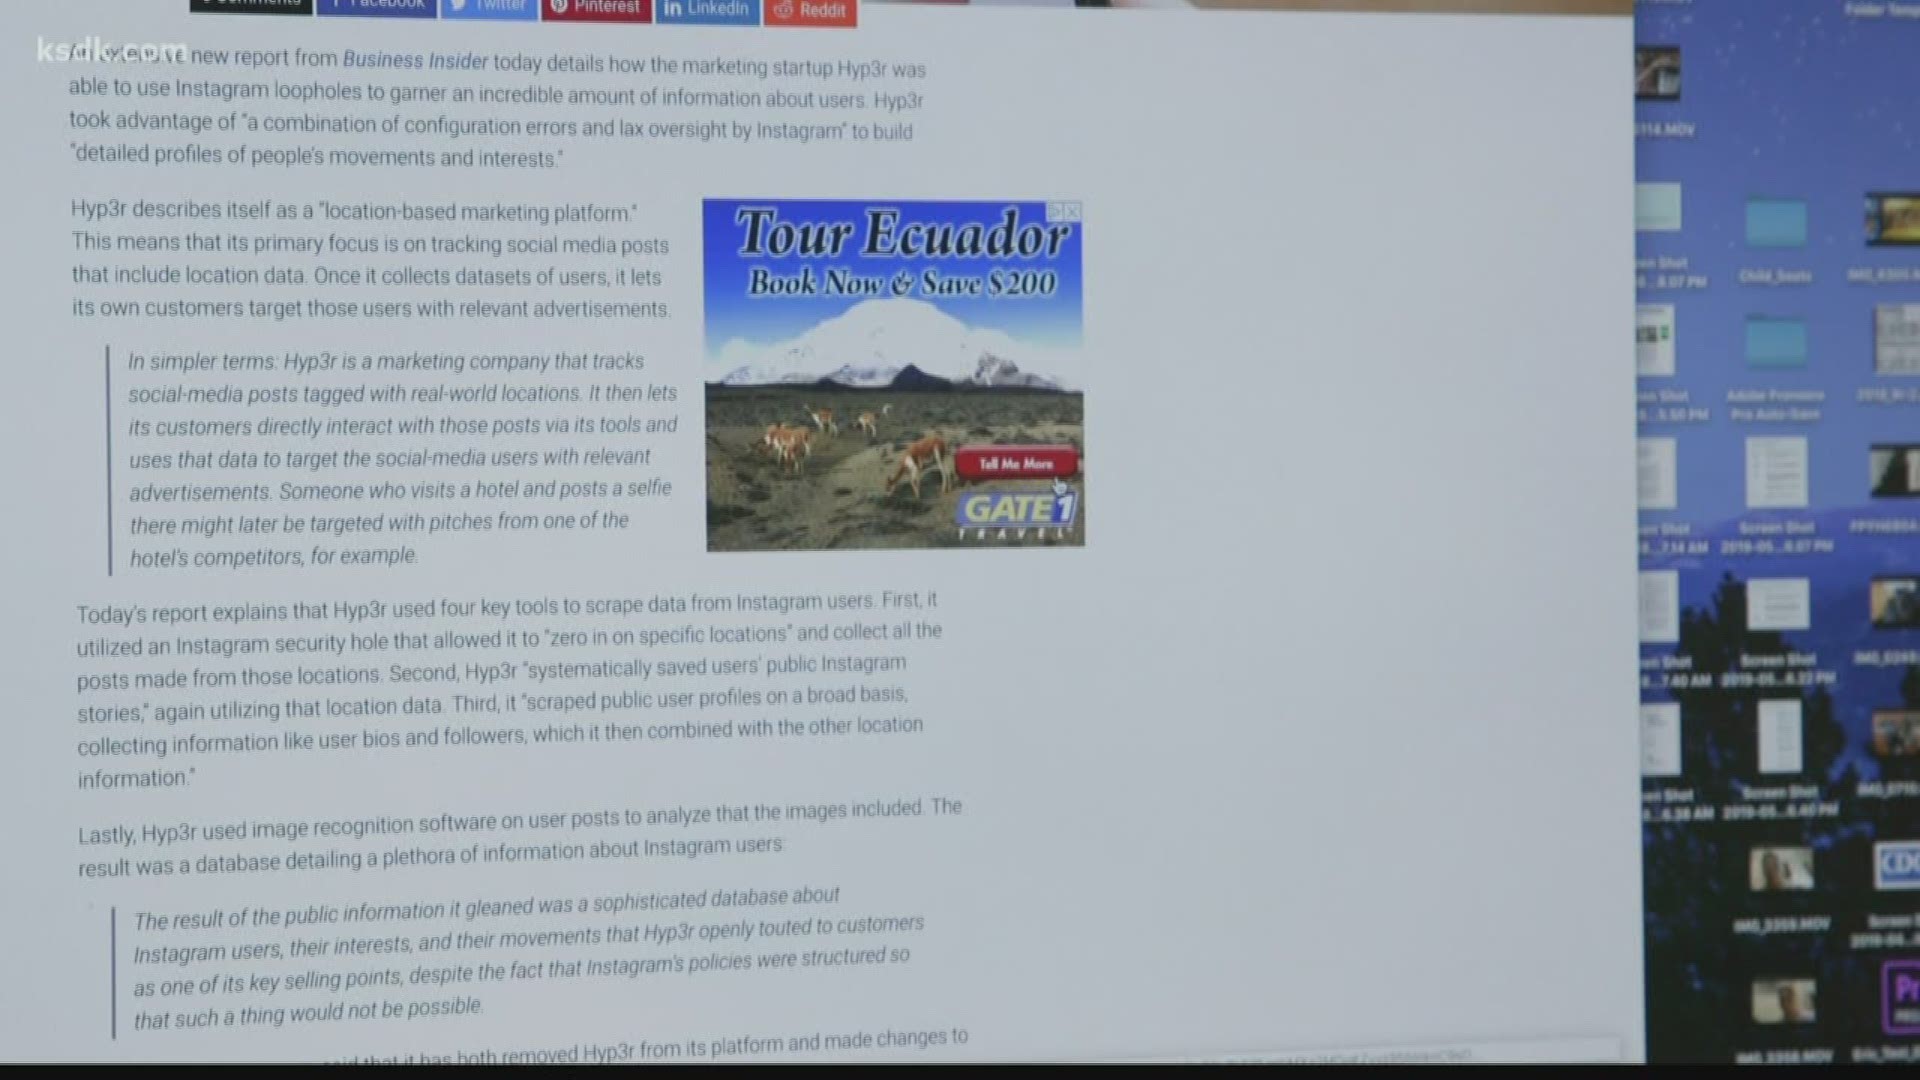 Consumer Reports offers tips on how to block unwanted ads.